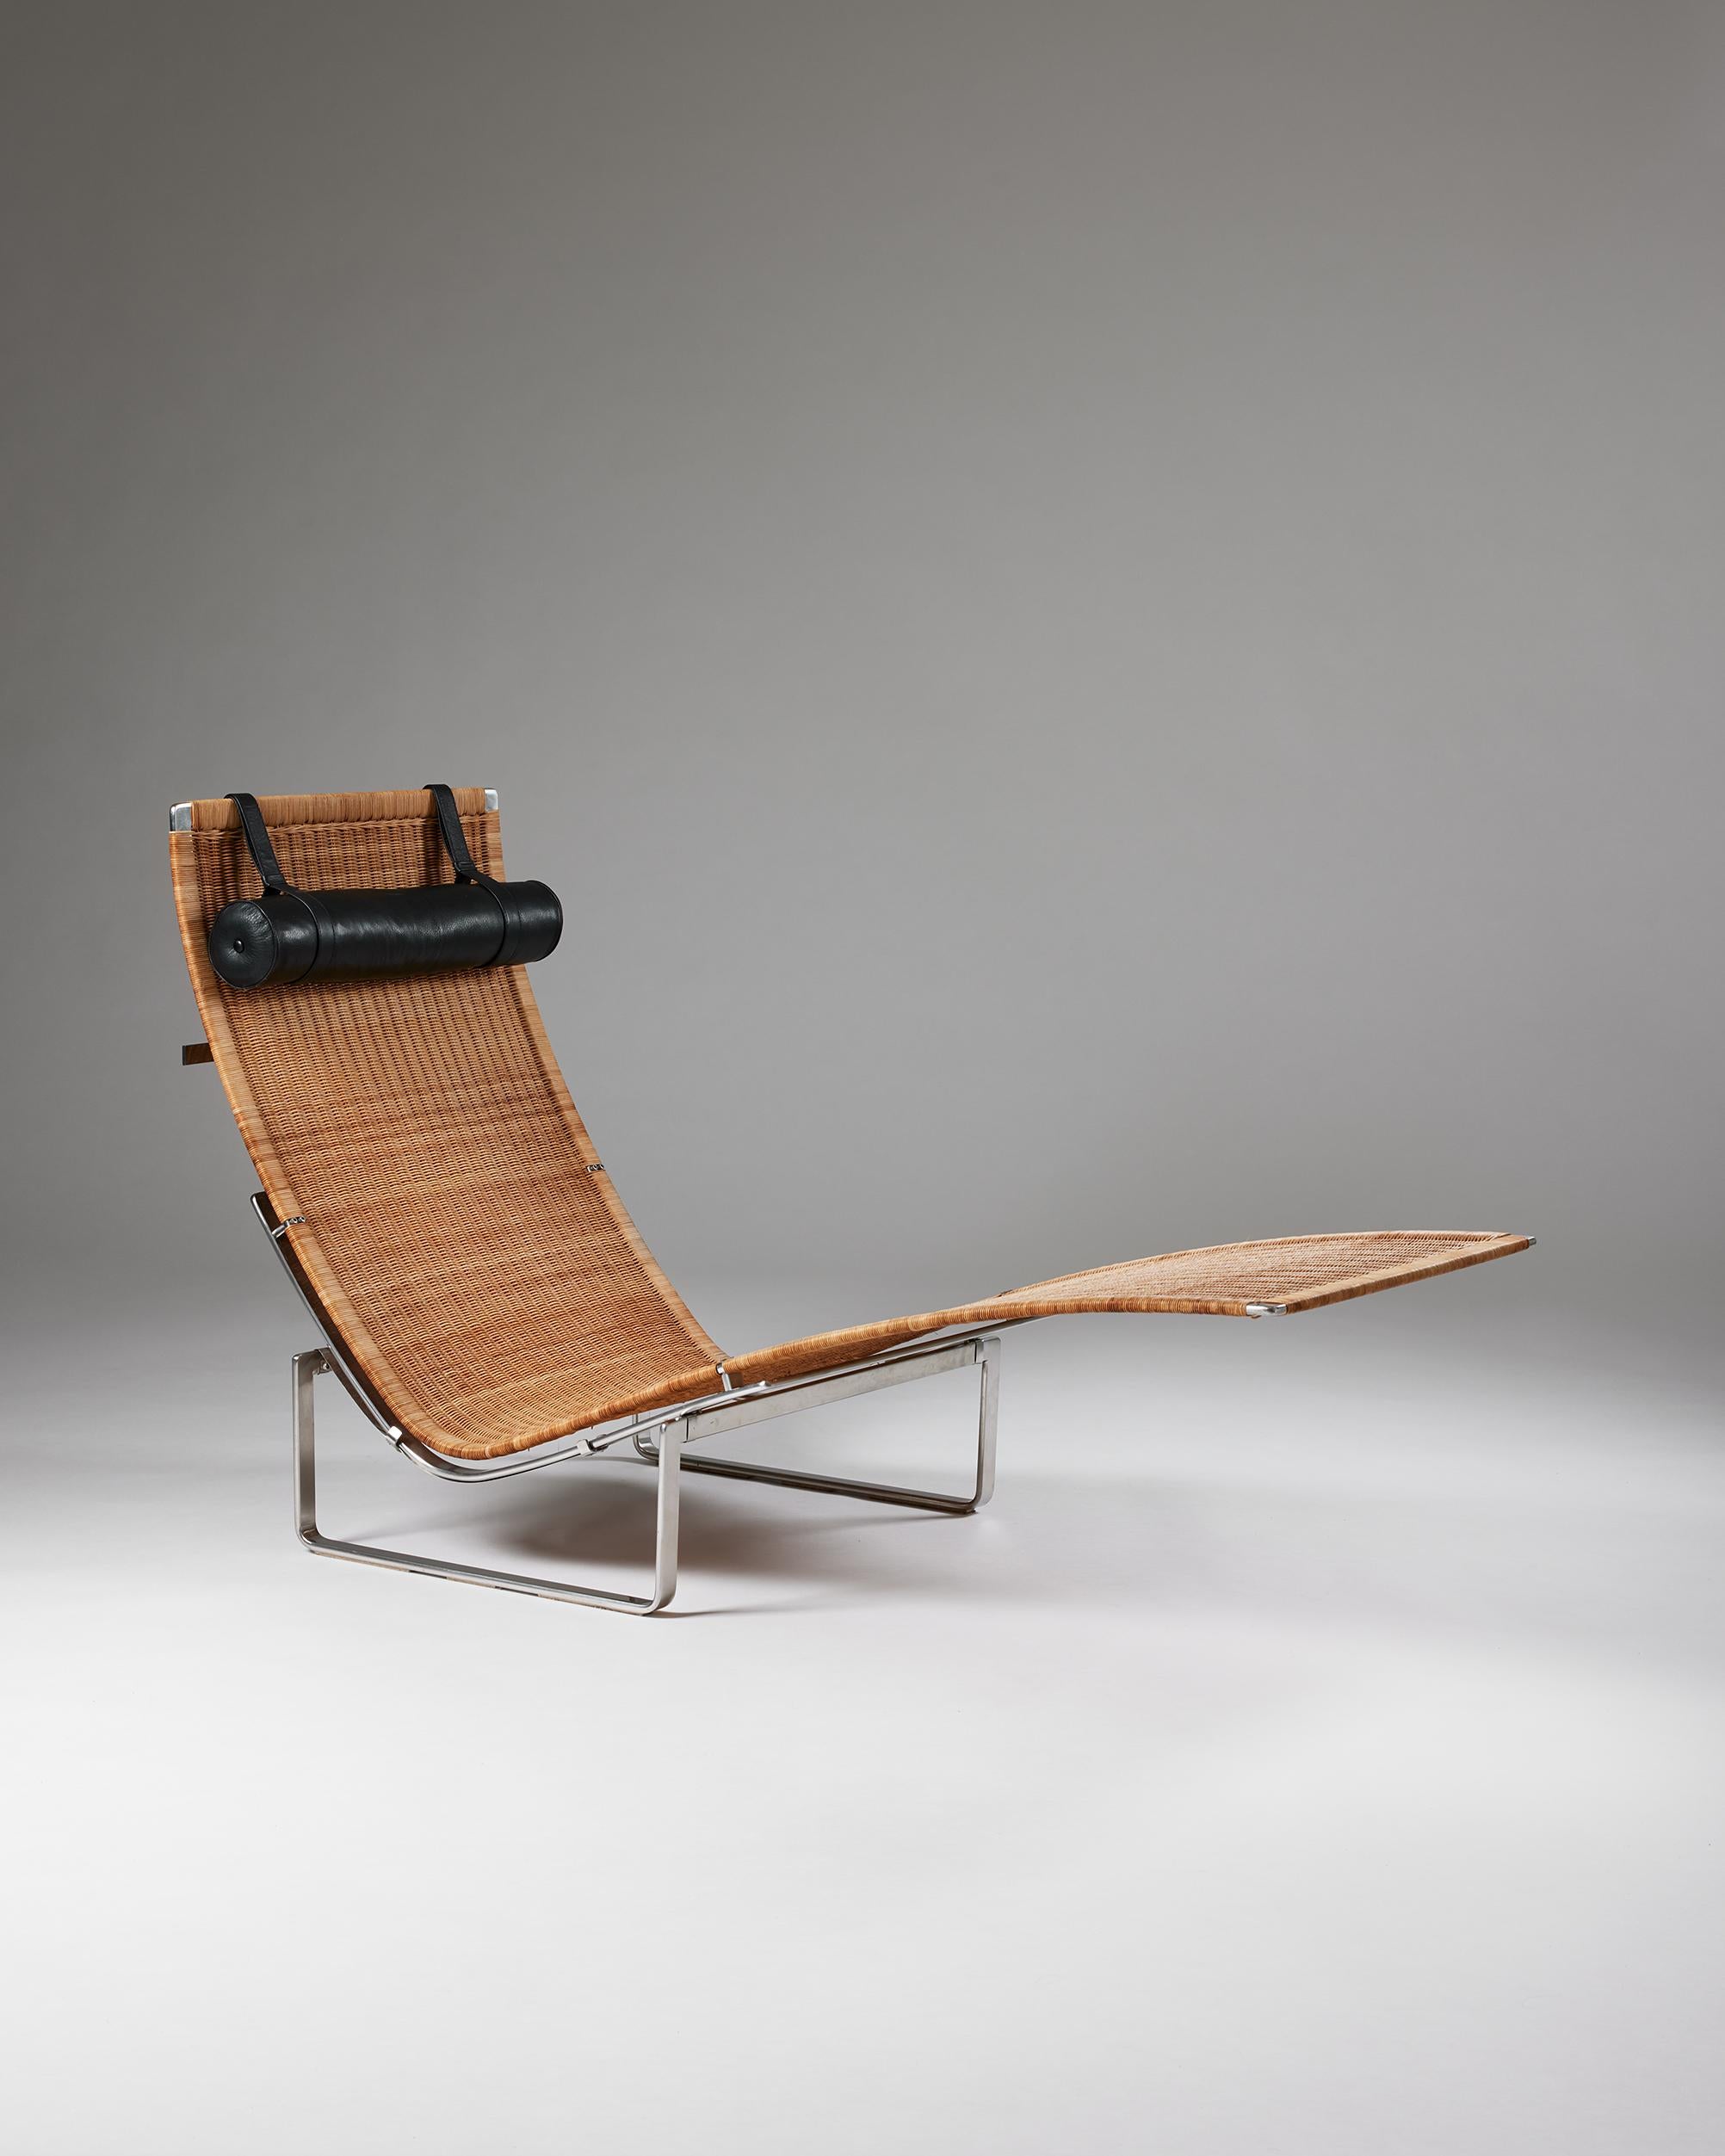 Chaise longue model PK24 designed by Poul Kjaerholm for E. Kold Christensen,
Denmark, 1965

Stainless steel, cane and leather.

Provenance:
20th Century Marks, Westerham
Acquired from the above by the present owner, 2002

L: 145 cm 
W: 60 cm 
H: 88